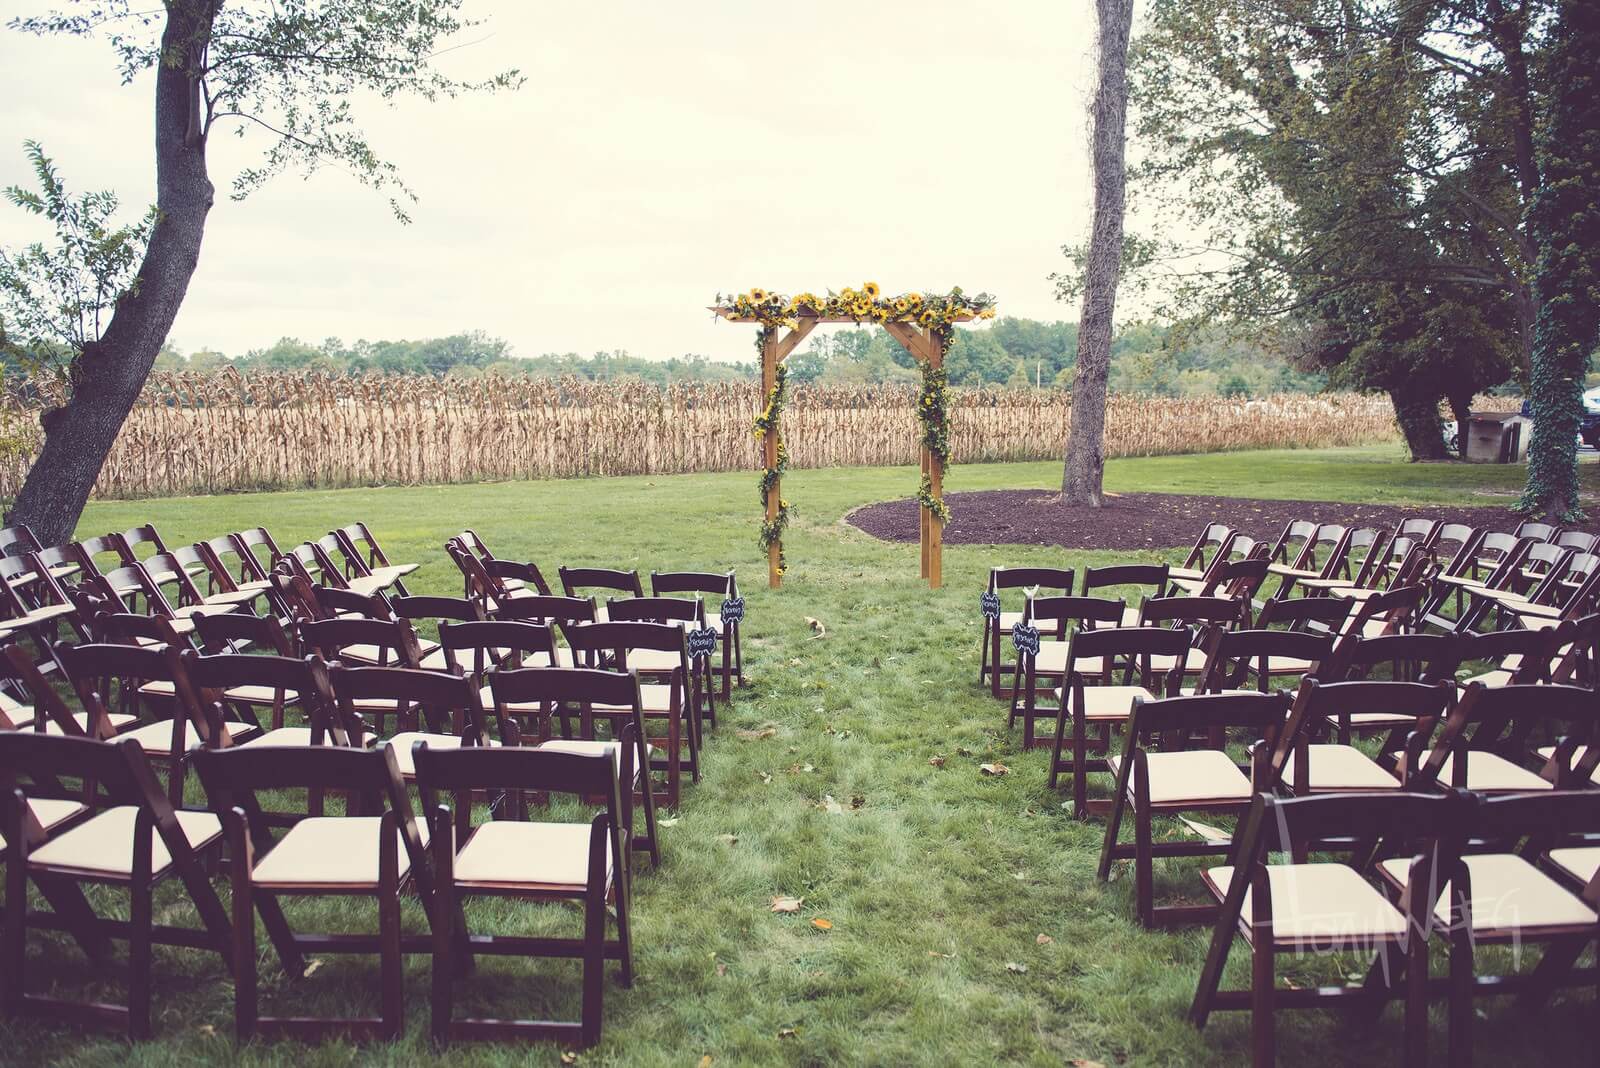 fruitwood wedding chairs lined up beside the alter